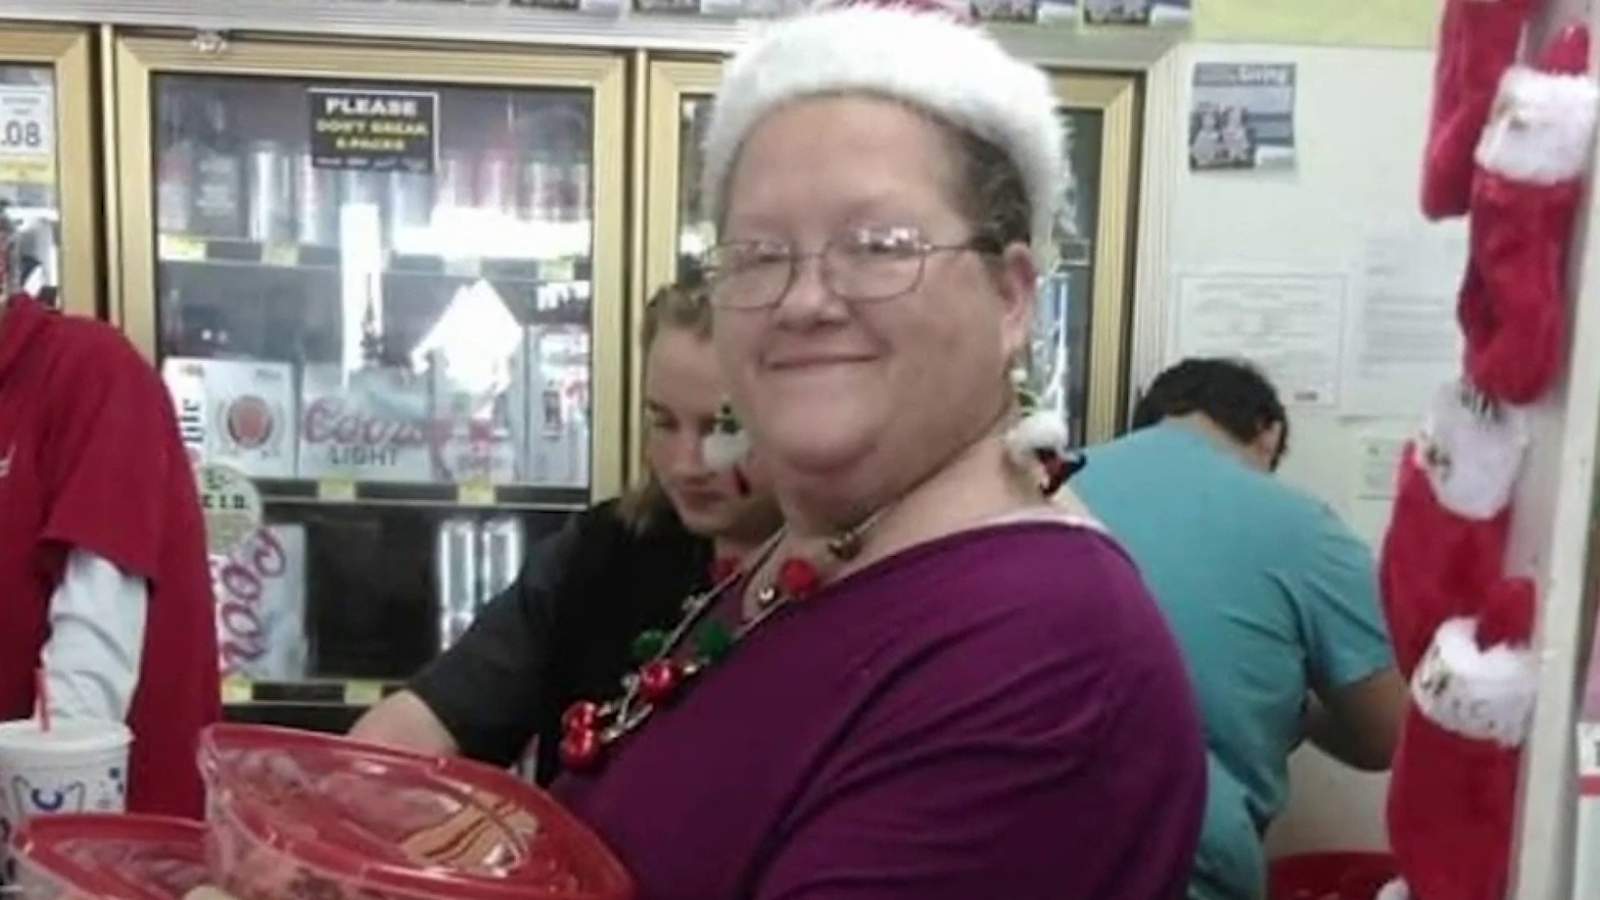 ‘There was no reason for him to take her life’: Family mourns loss of convenience store clerk